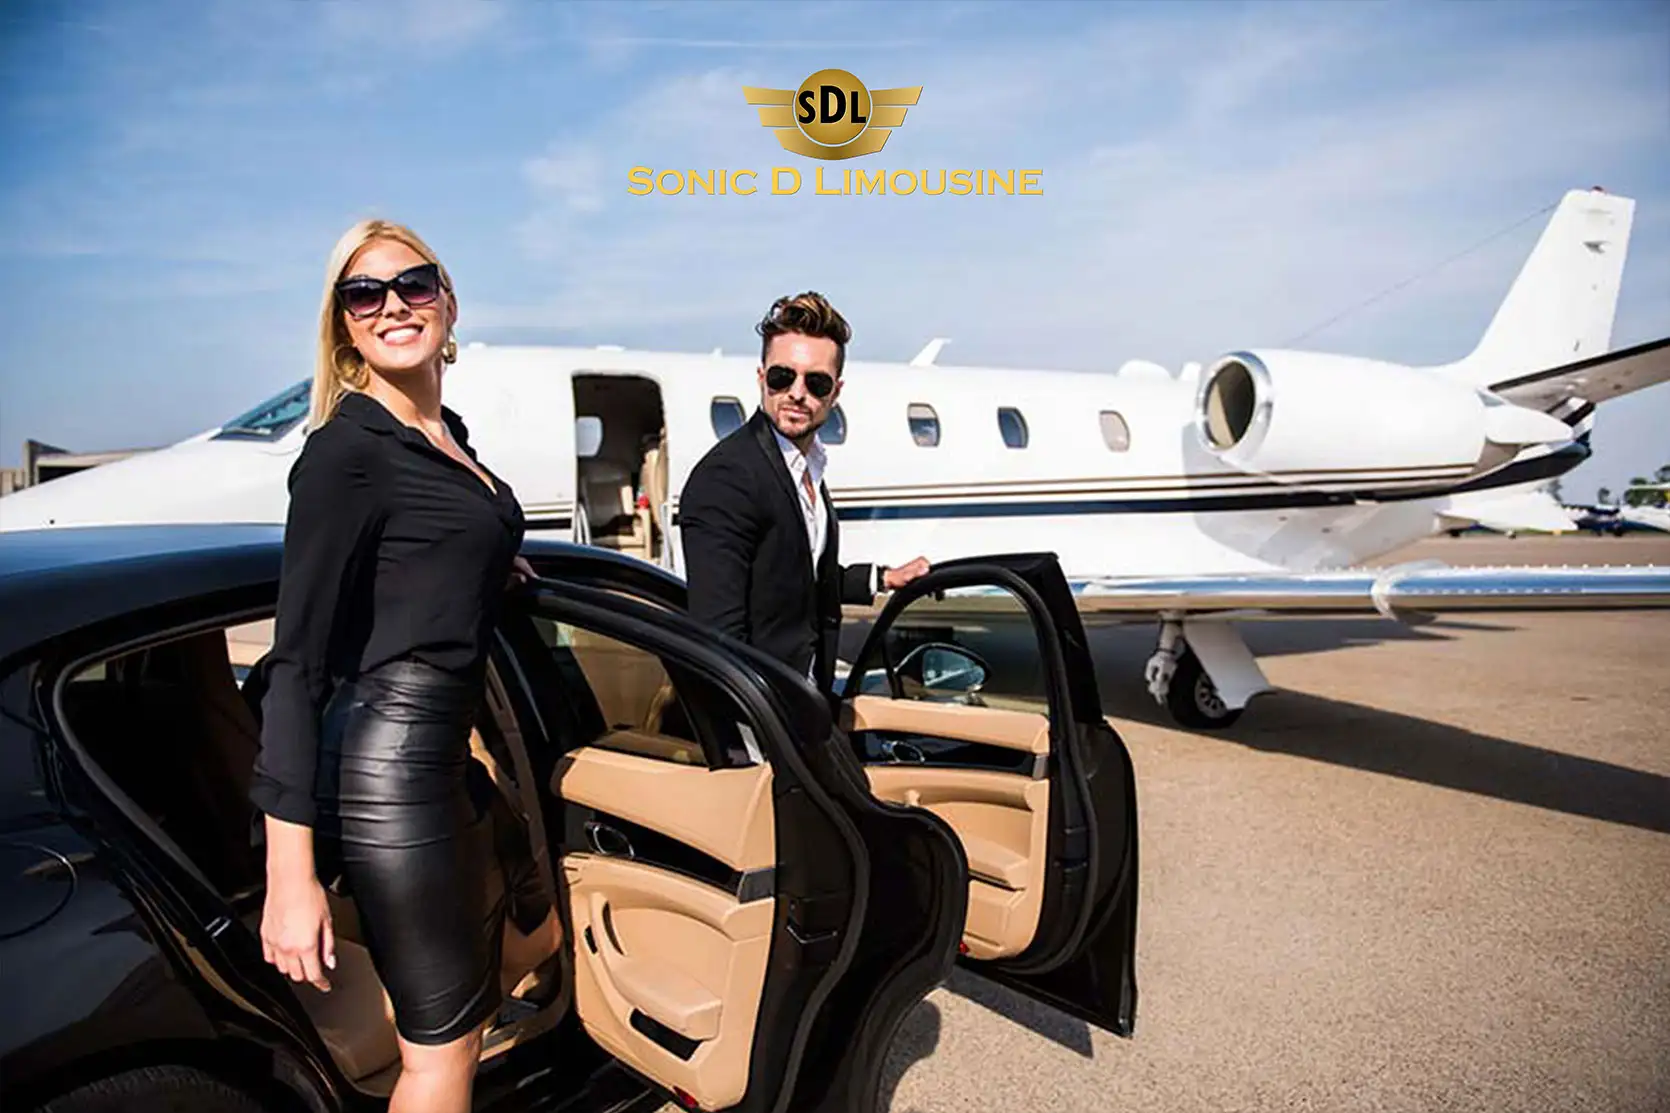 Sonic D Limousine A man and woman standing next to a private jet.